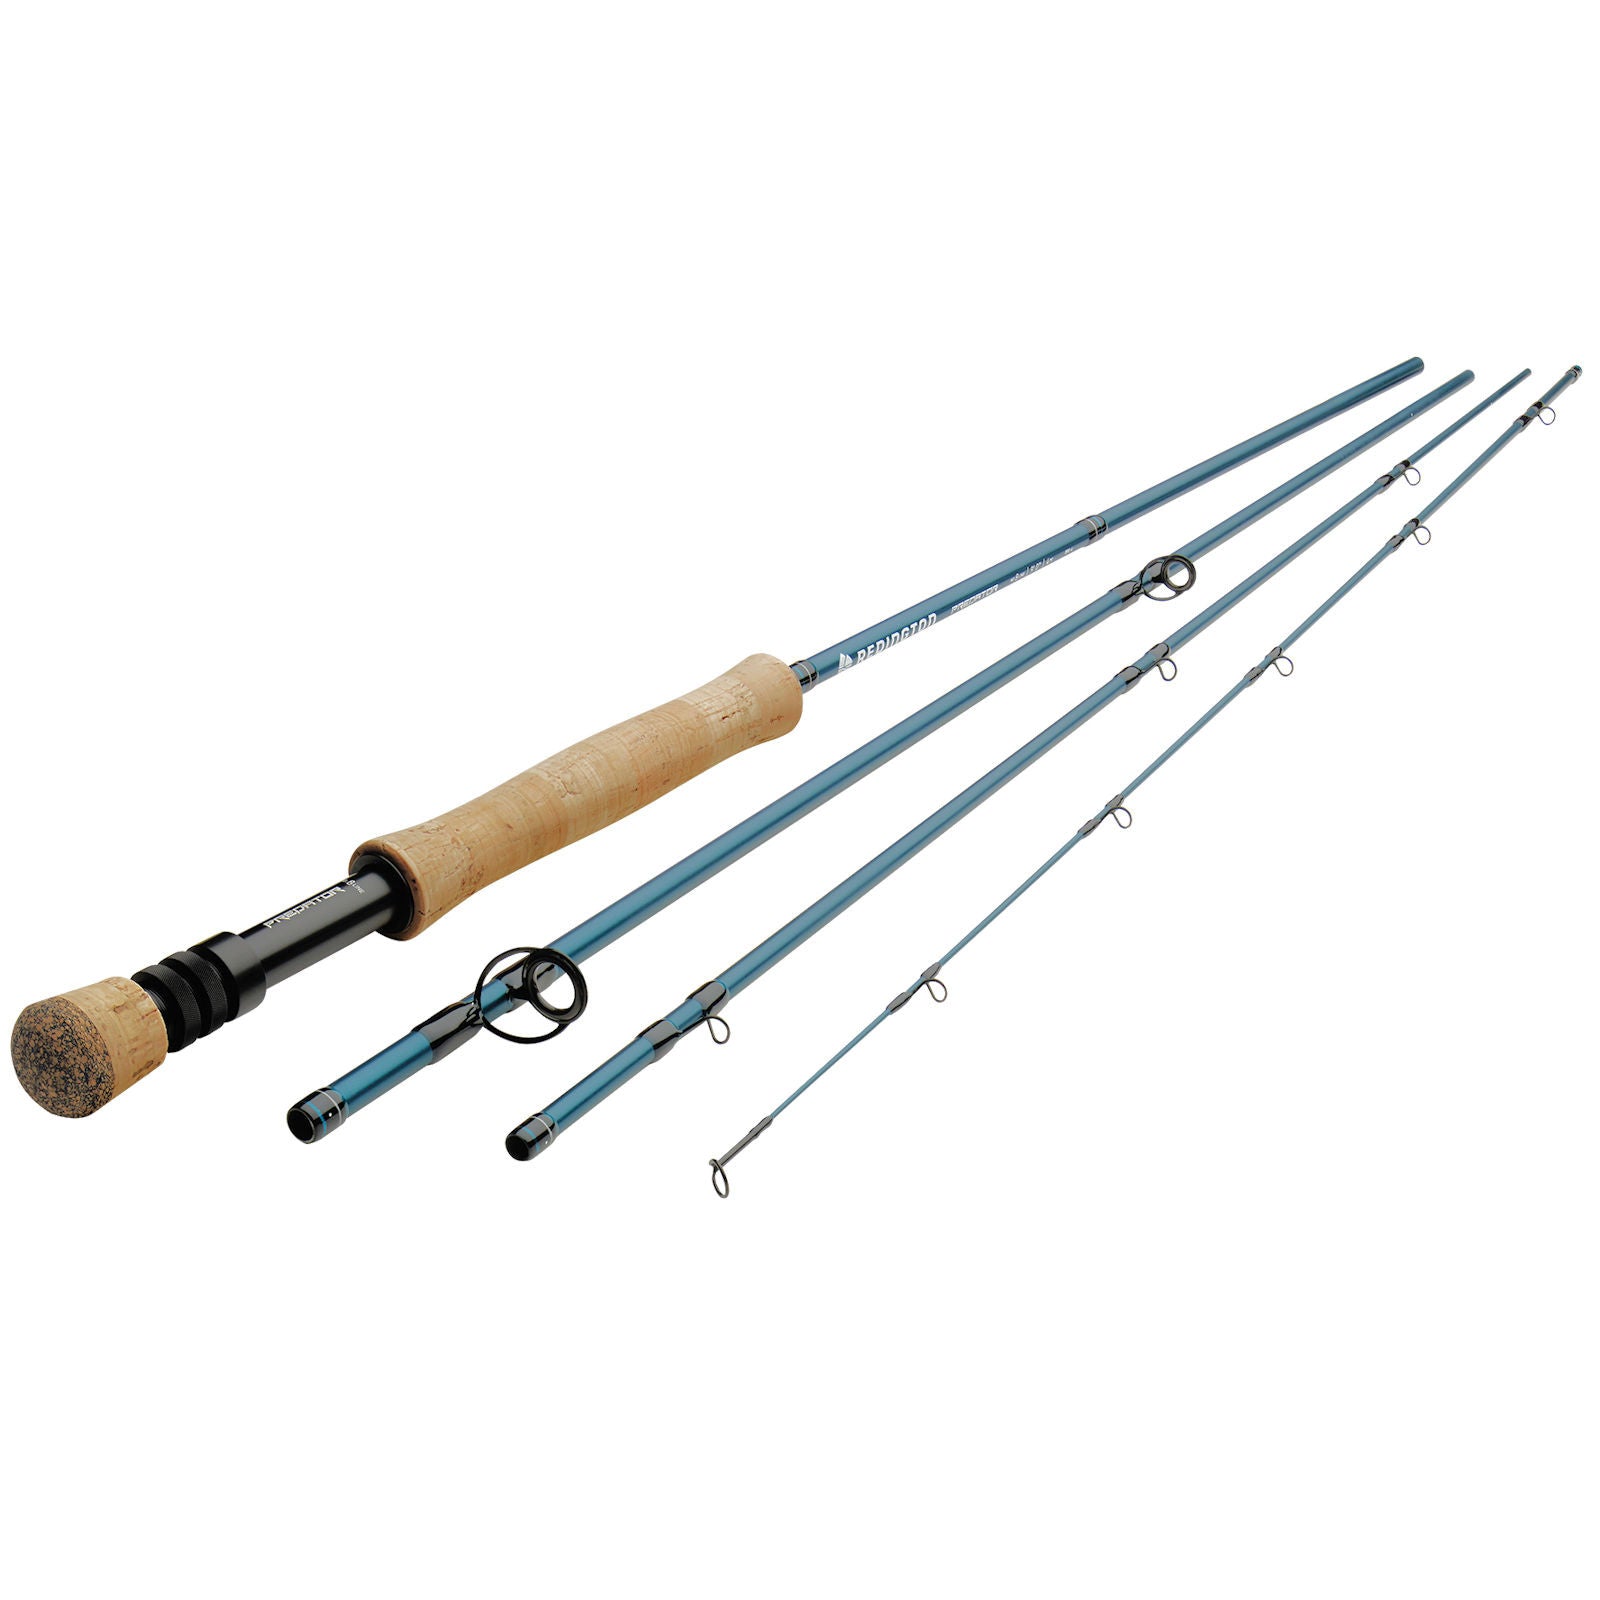 Cheap, Durable, and Sturdy White Rabbit Fishing Rod For All